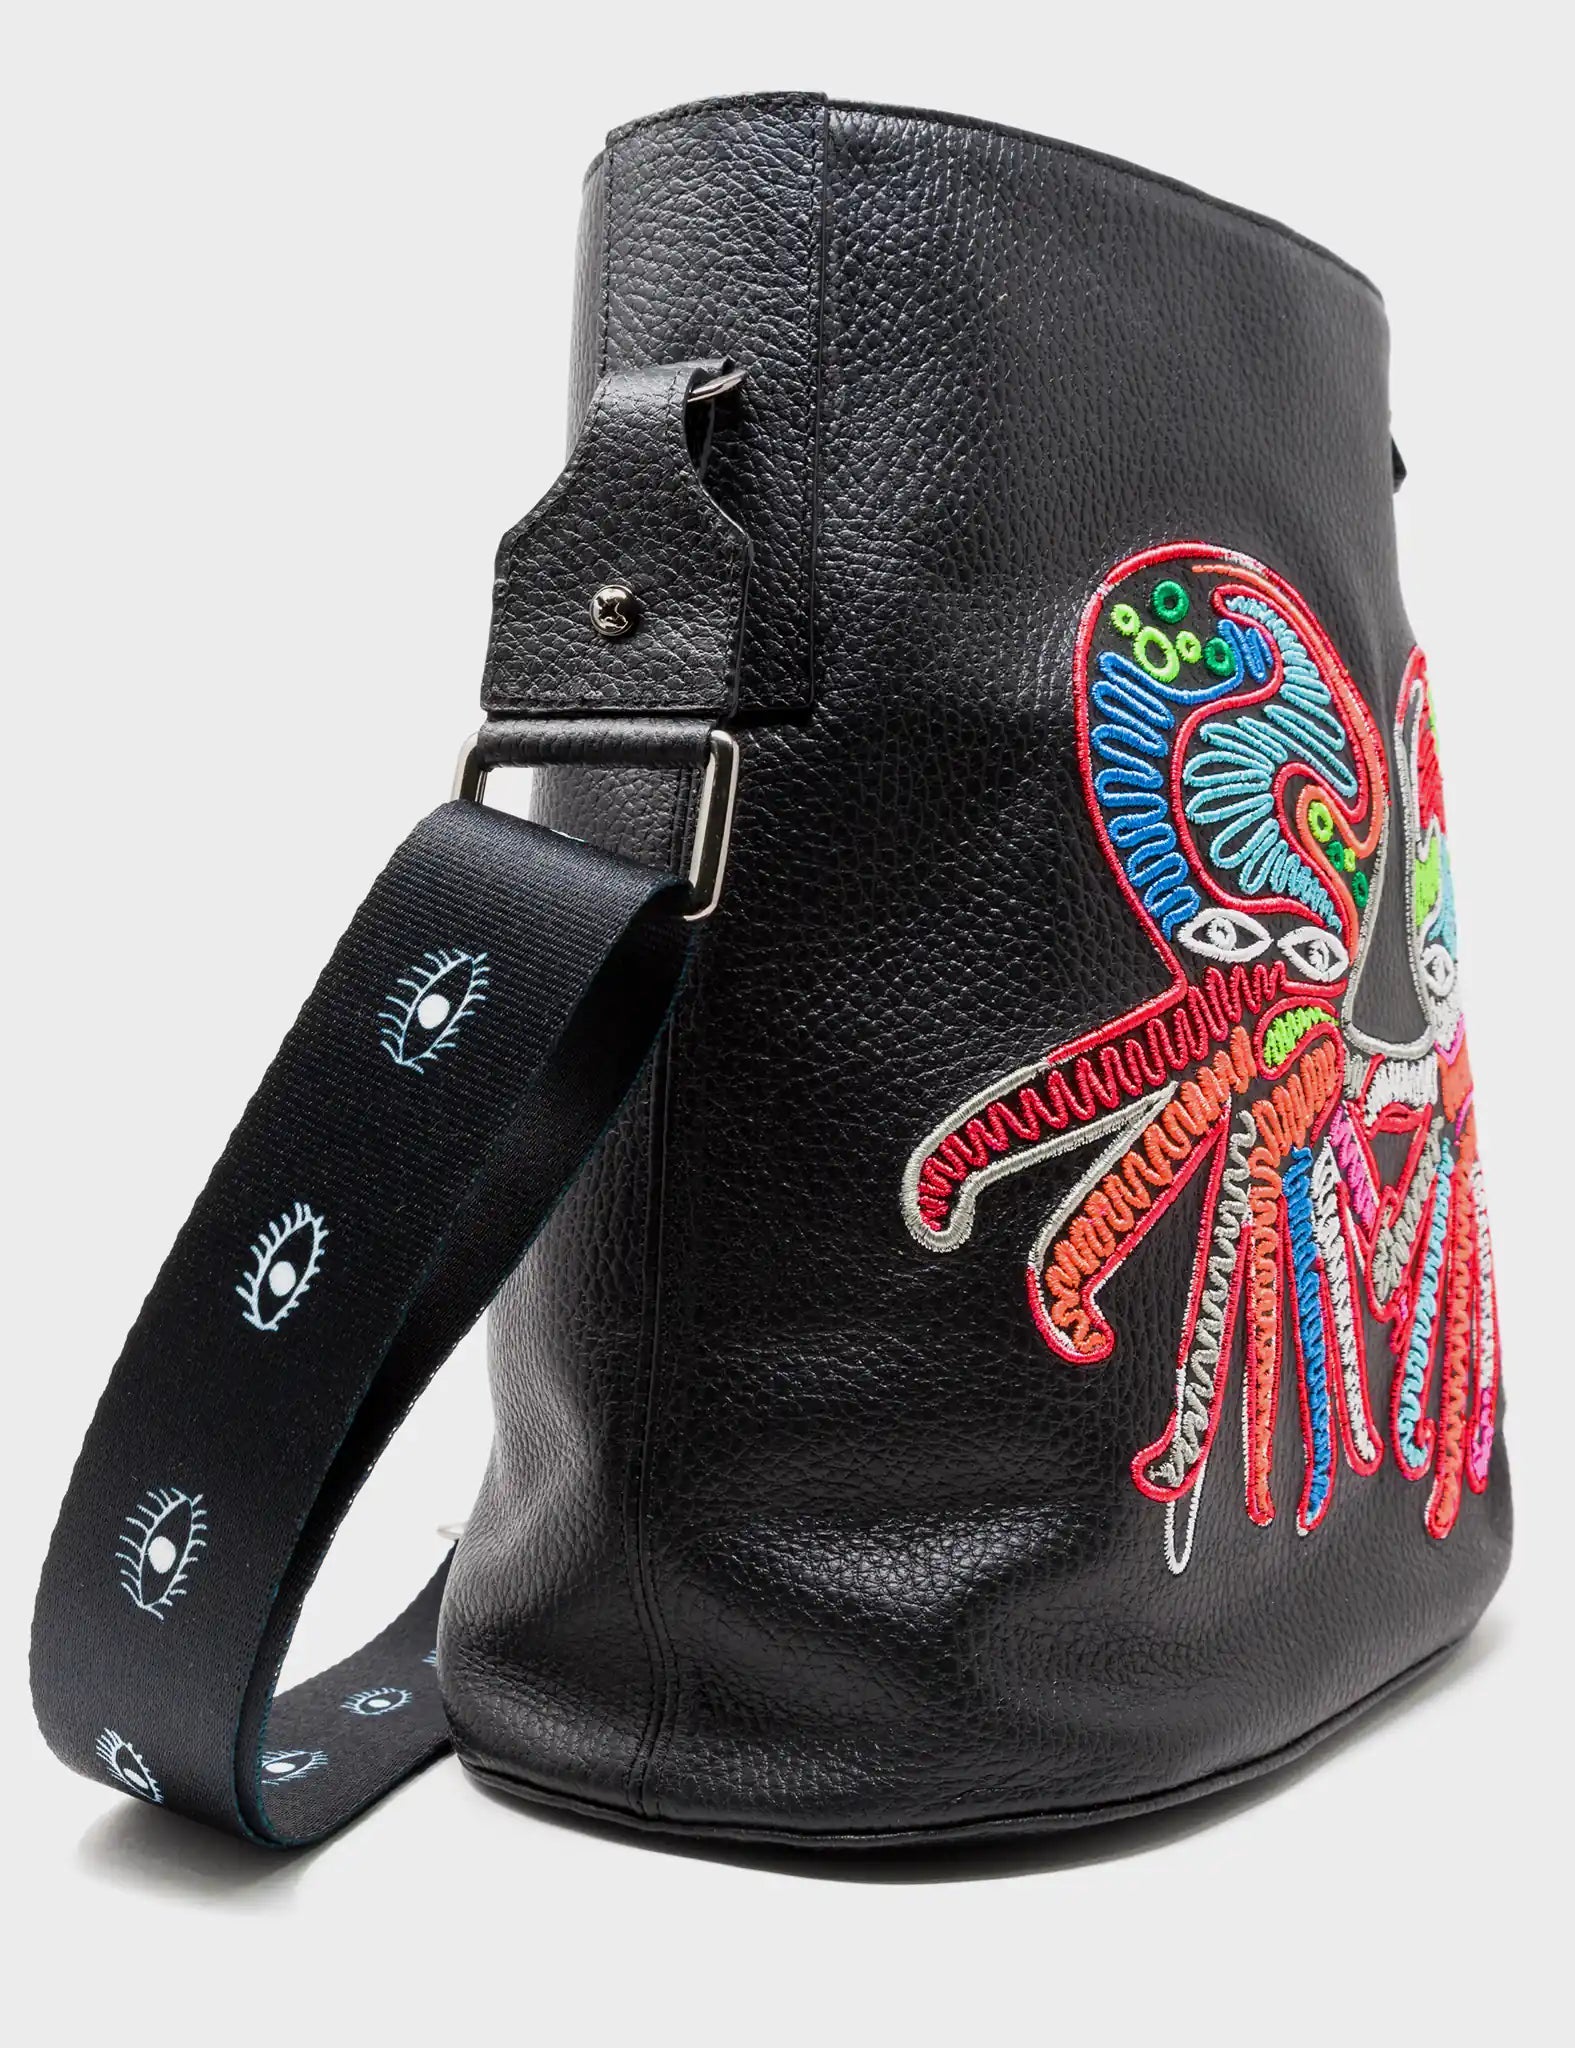 Black Leather bucket Bag Multicolored Octopus Embroidery Design